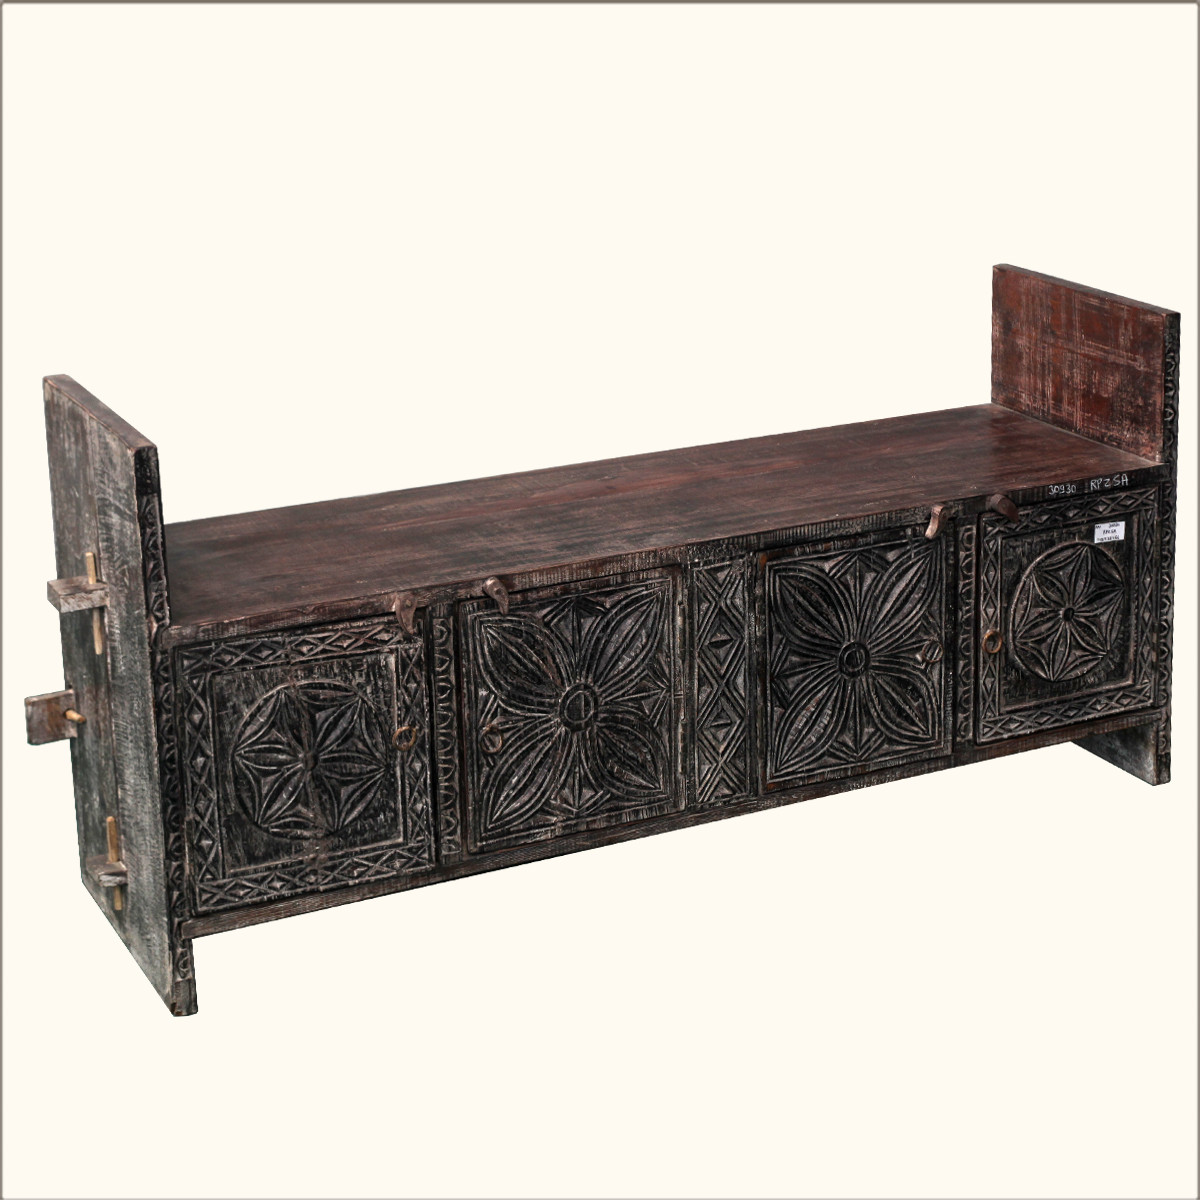 Reclaimed Wood Storage Bench
 Rustic Reclaimed Wood Storage Cabinet Backless Hand Carved